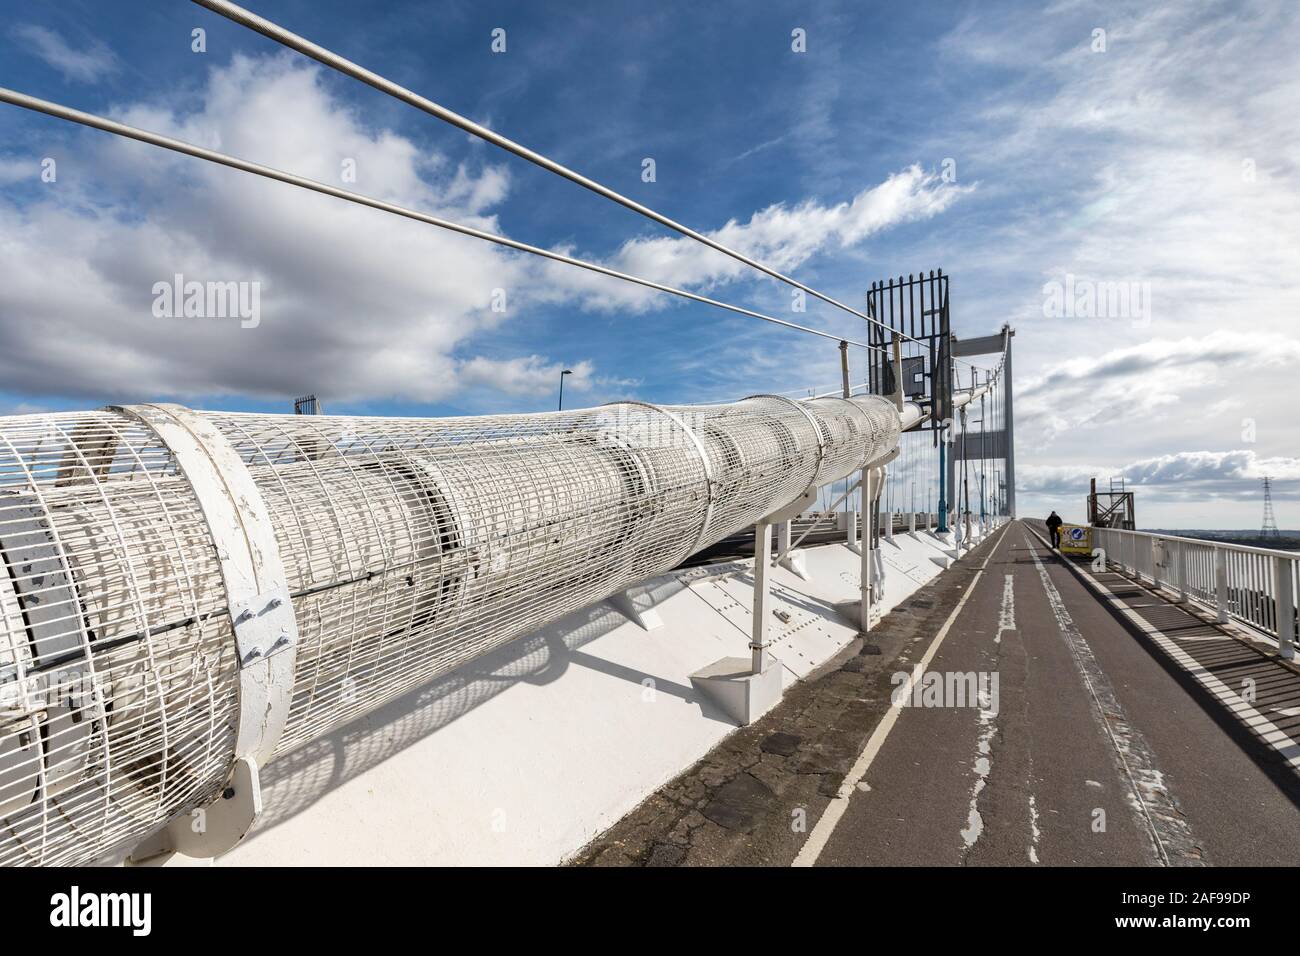 Protection around suspension cables, Severn Crossing old bridge, South Wales, UK Stock Photo